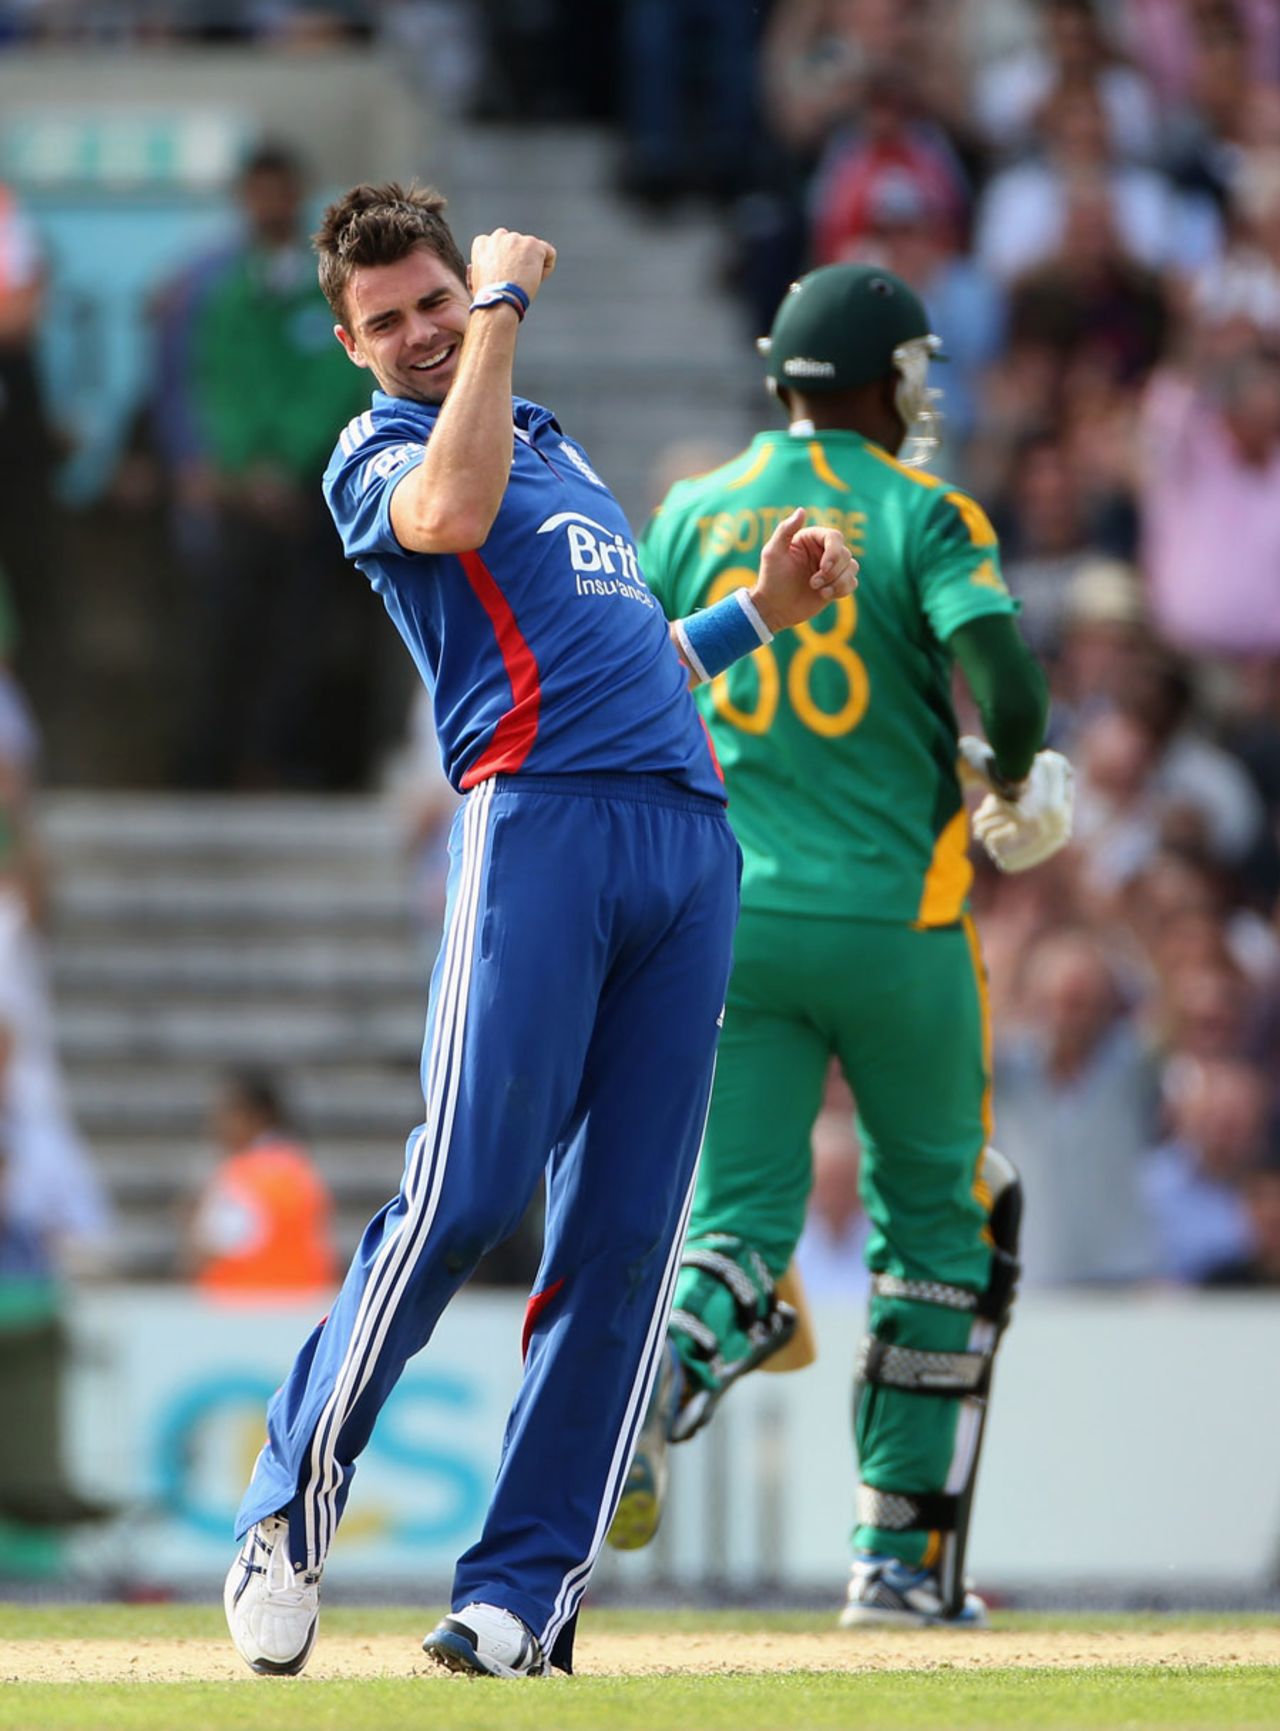 James Anderson took the last three wickets to end with 4 for 44, England v South Africa, 3rd NatWest ODI, The Oval, August 31, 2012